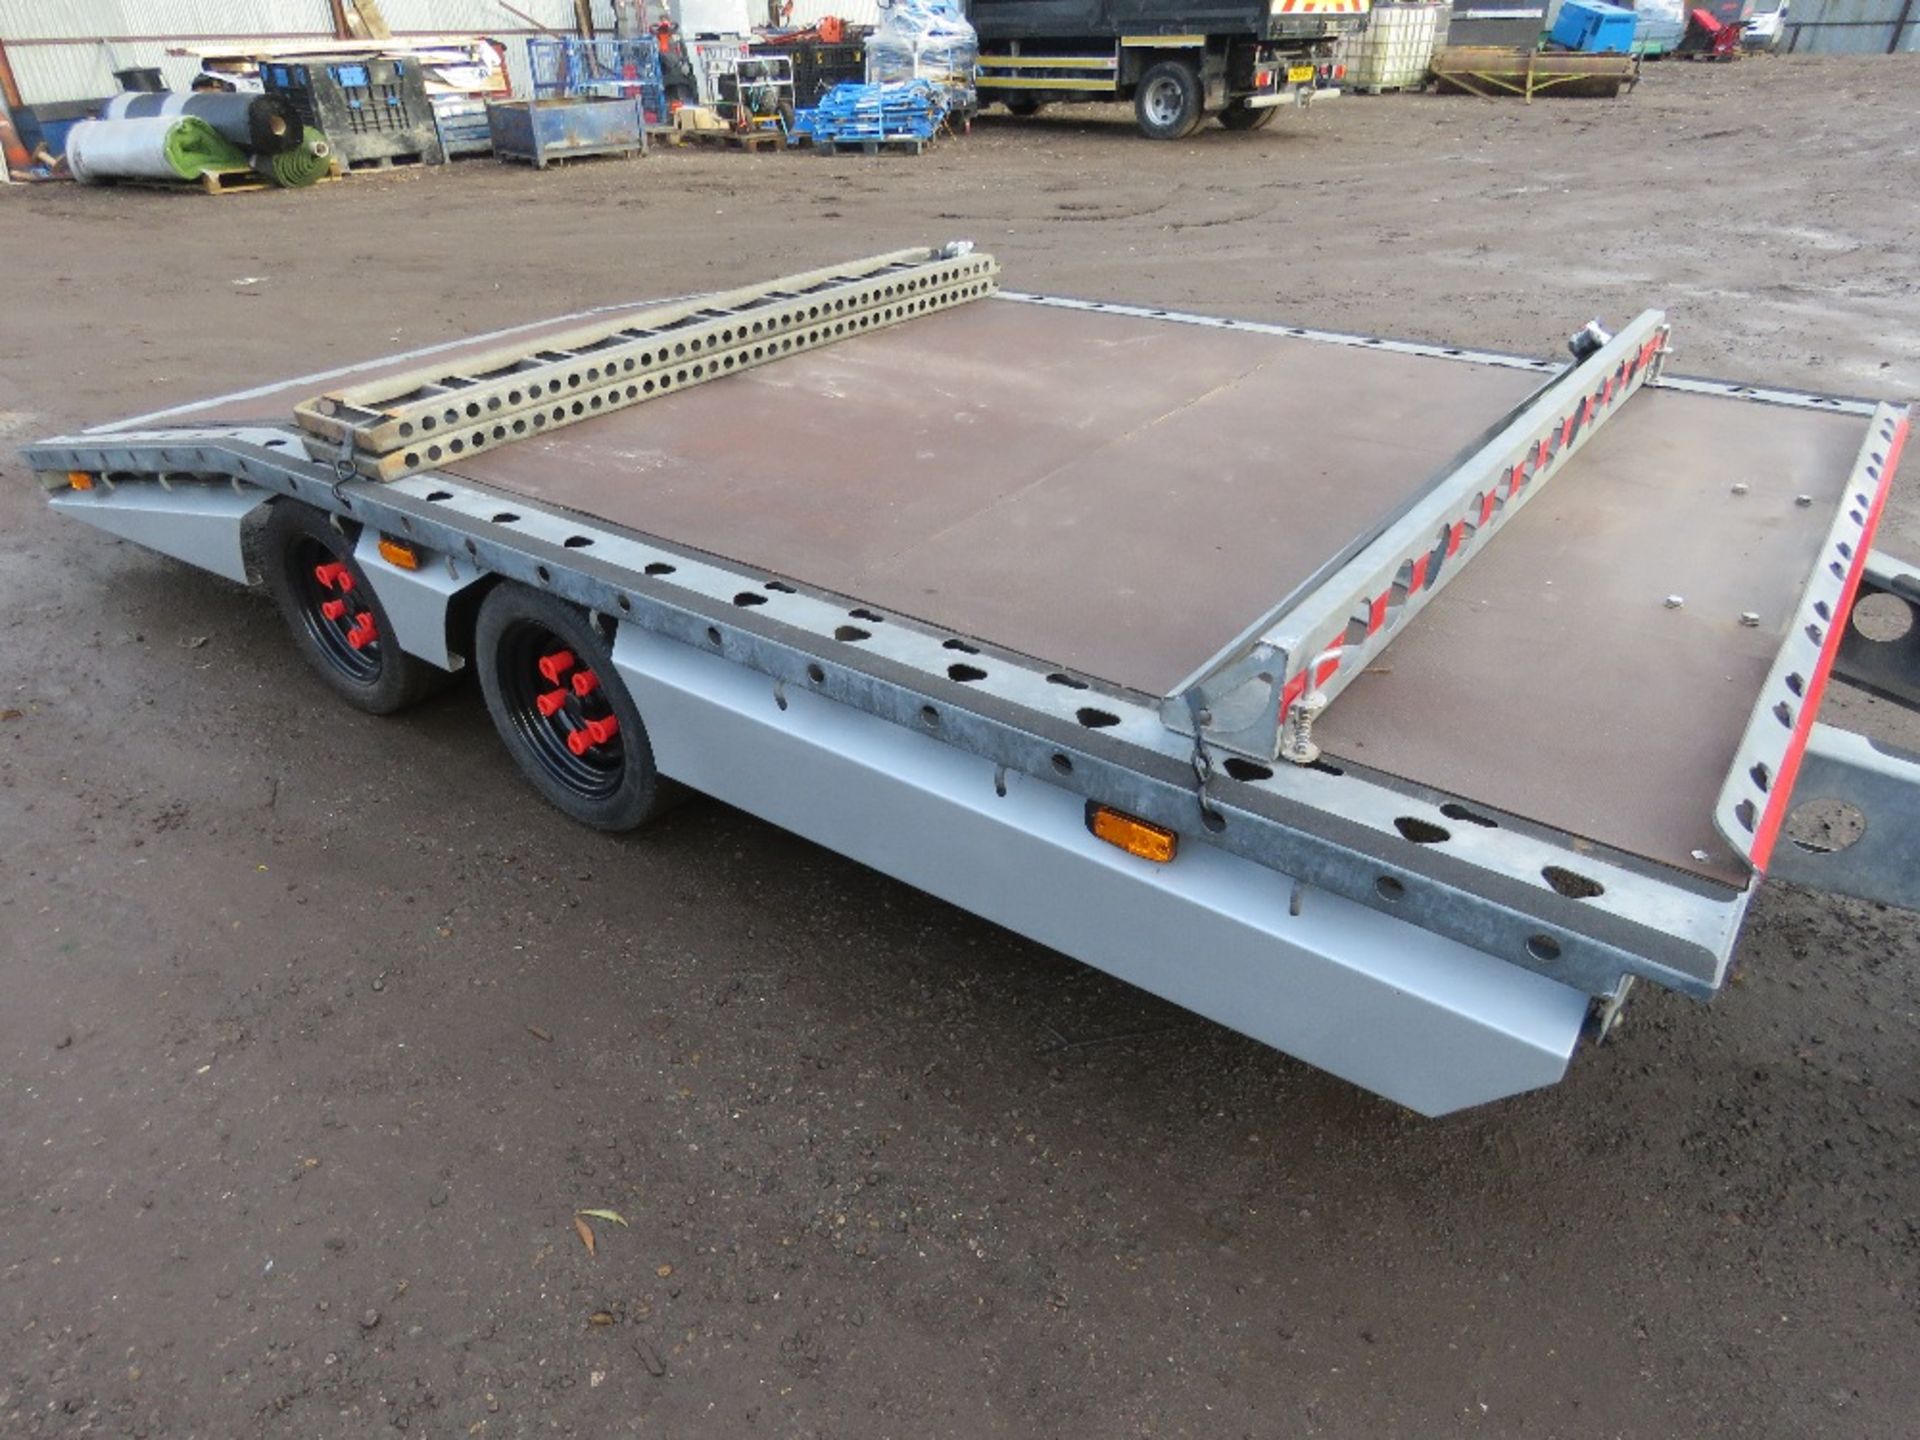 PLOWMAN PCT41 TWIN AXLED BEAVERTAIL TRAILER. 13FT X 7FT BED APPROX WITH RAMPS AS SHOWN. 3OOOKG RATED - Image 3 of 8